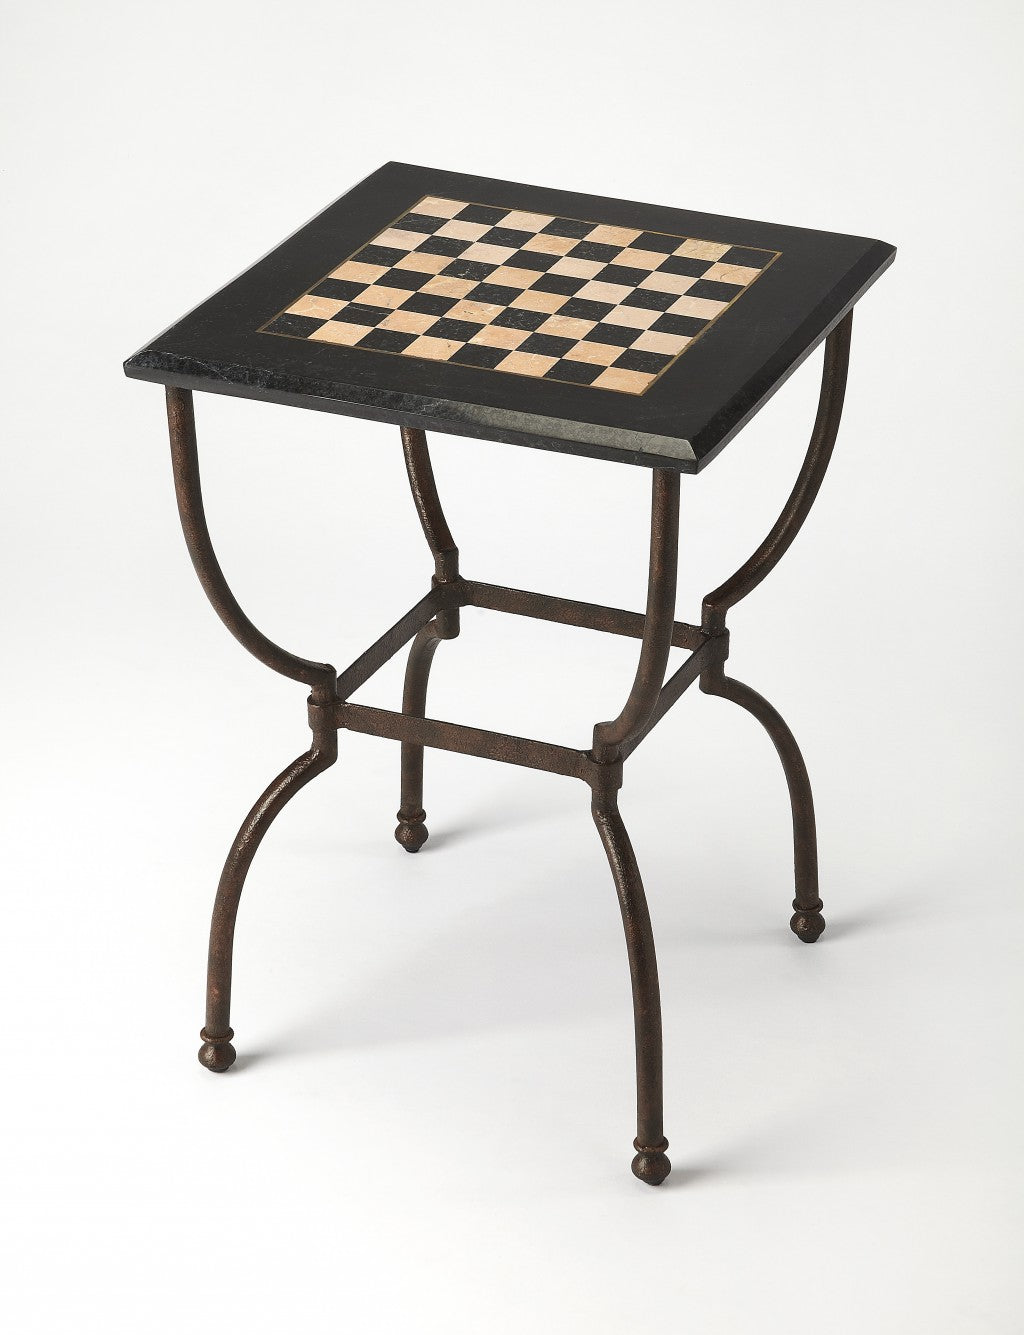 Fossil Stone Game Table - 99fab 